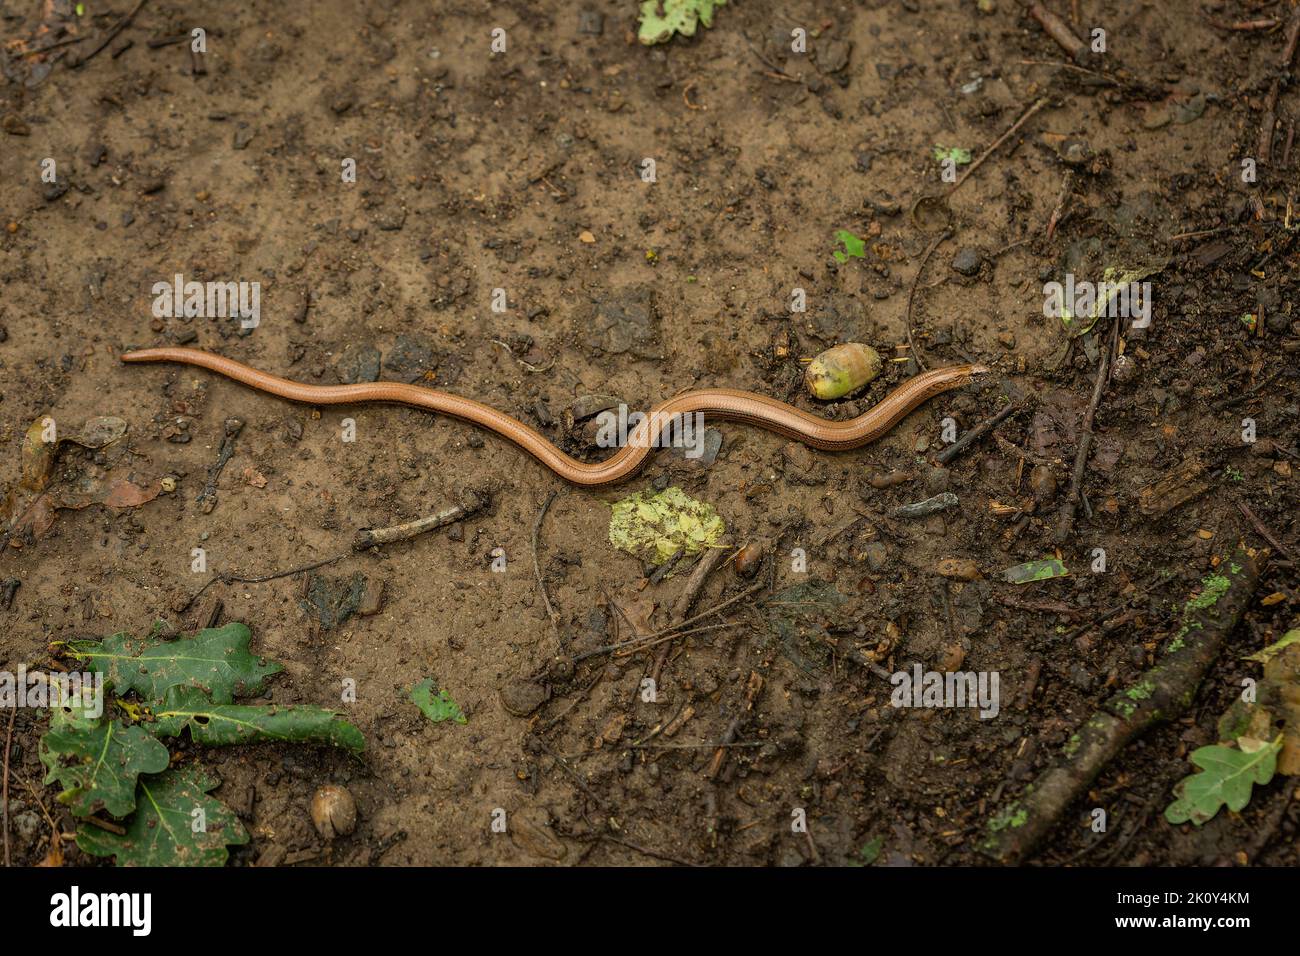 Top view of a thin brown slowworm crawling on the wet ground with green leaves. Stock Photo